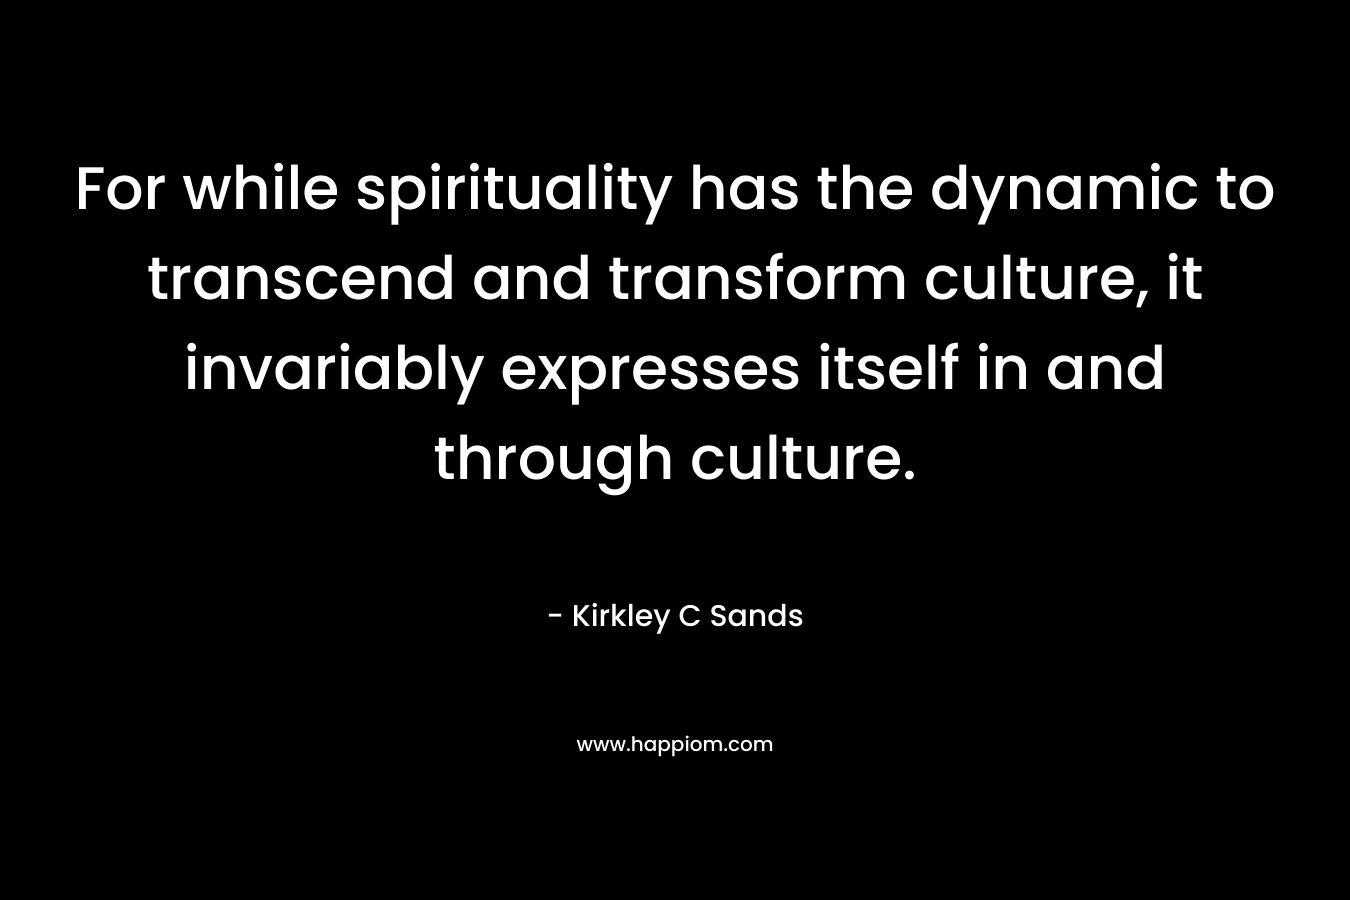 For while spirituality has the dynamic to transcend and transform culture, it invariably expresses itself in and through culture. – Kirkley C Sands